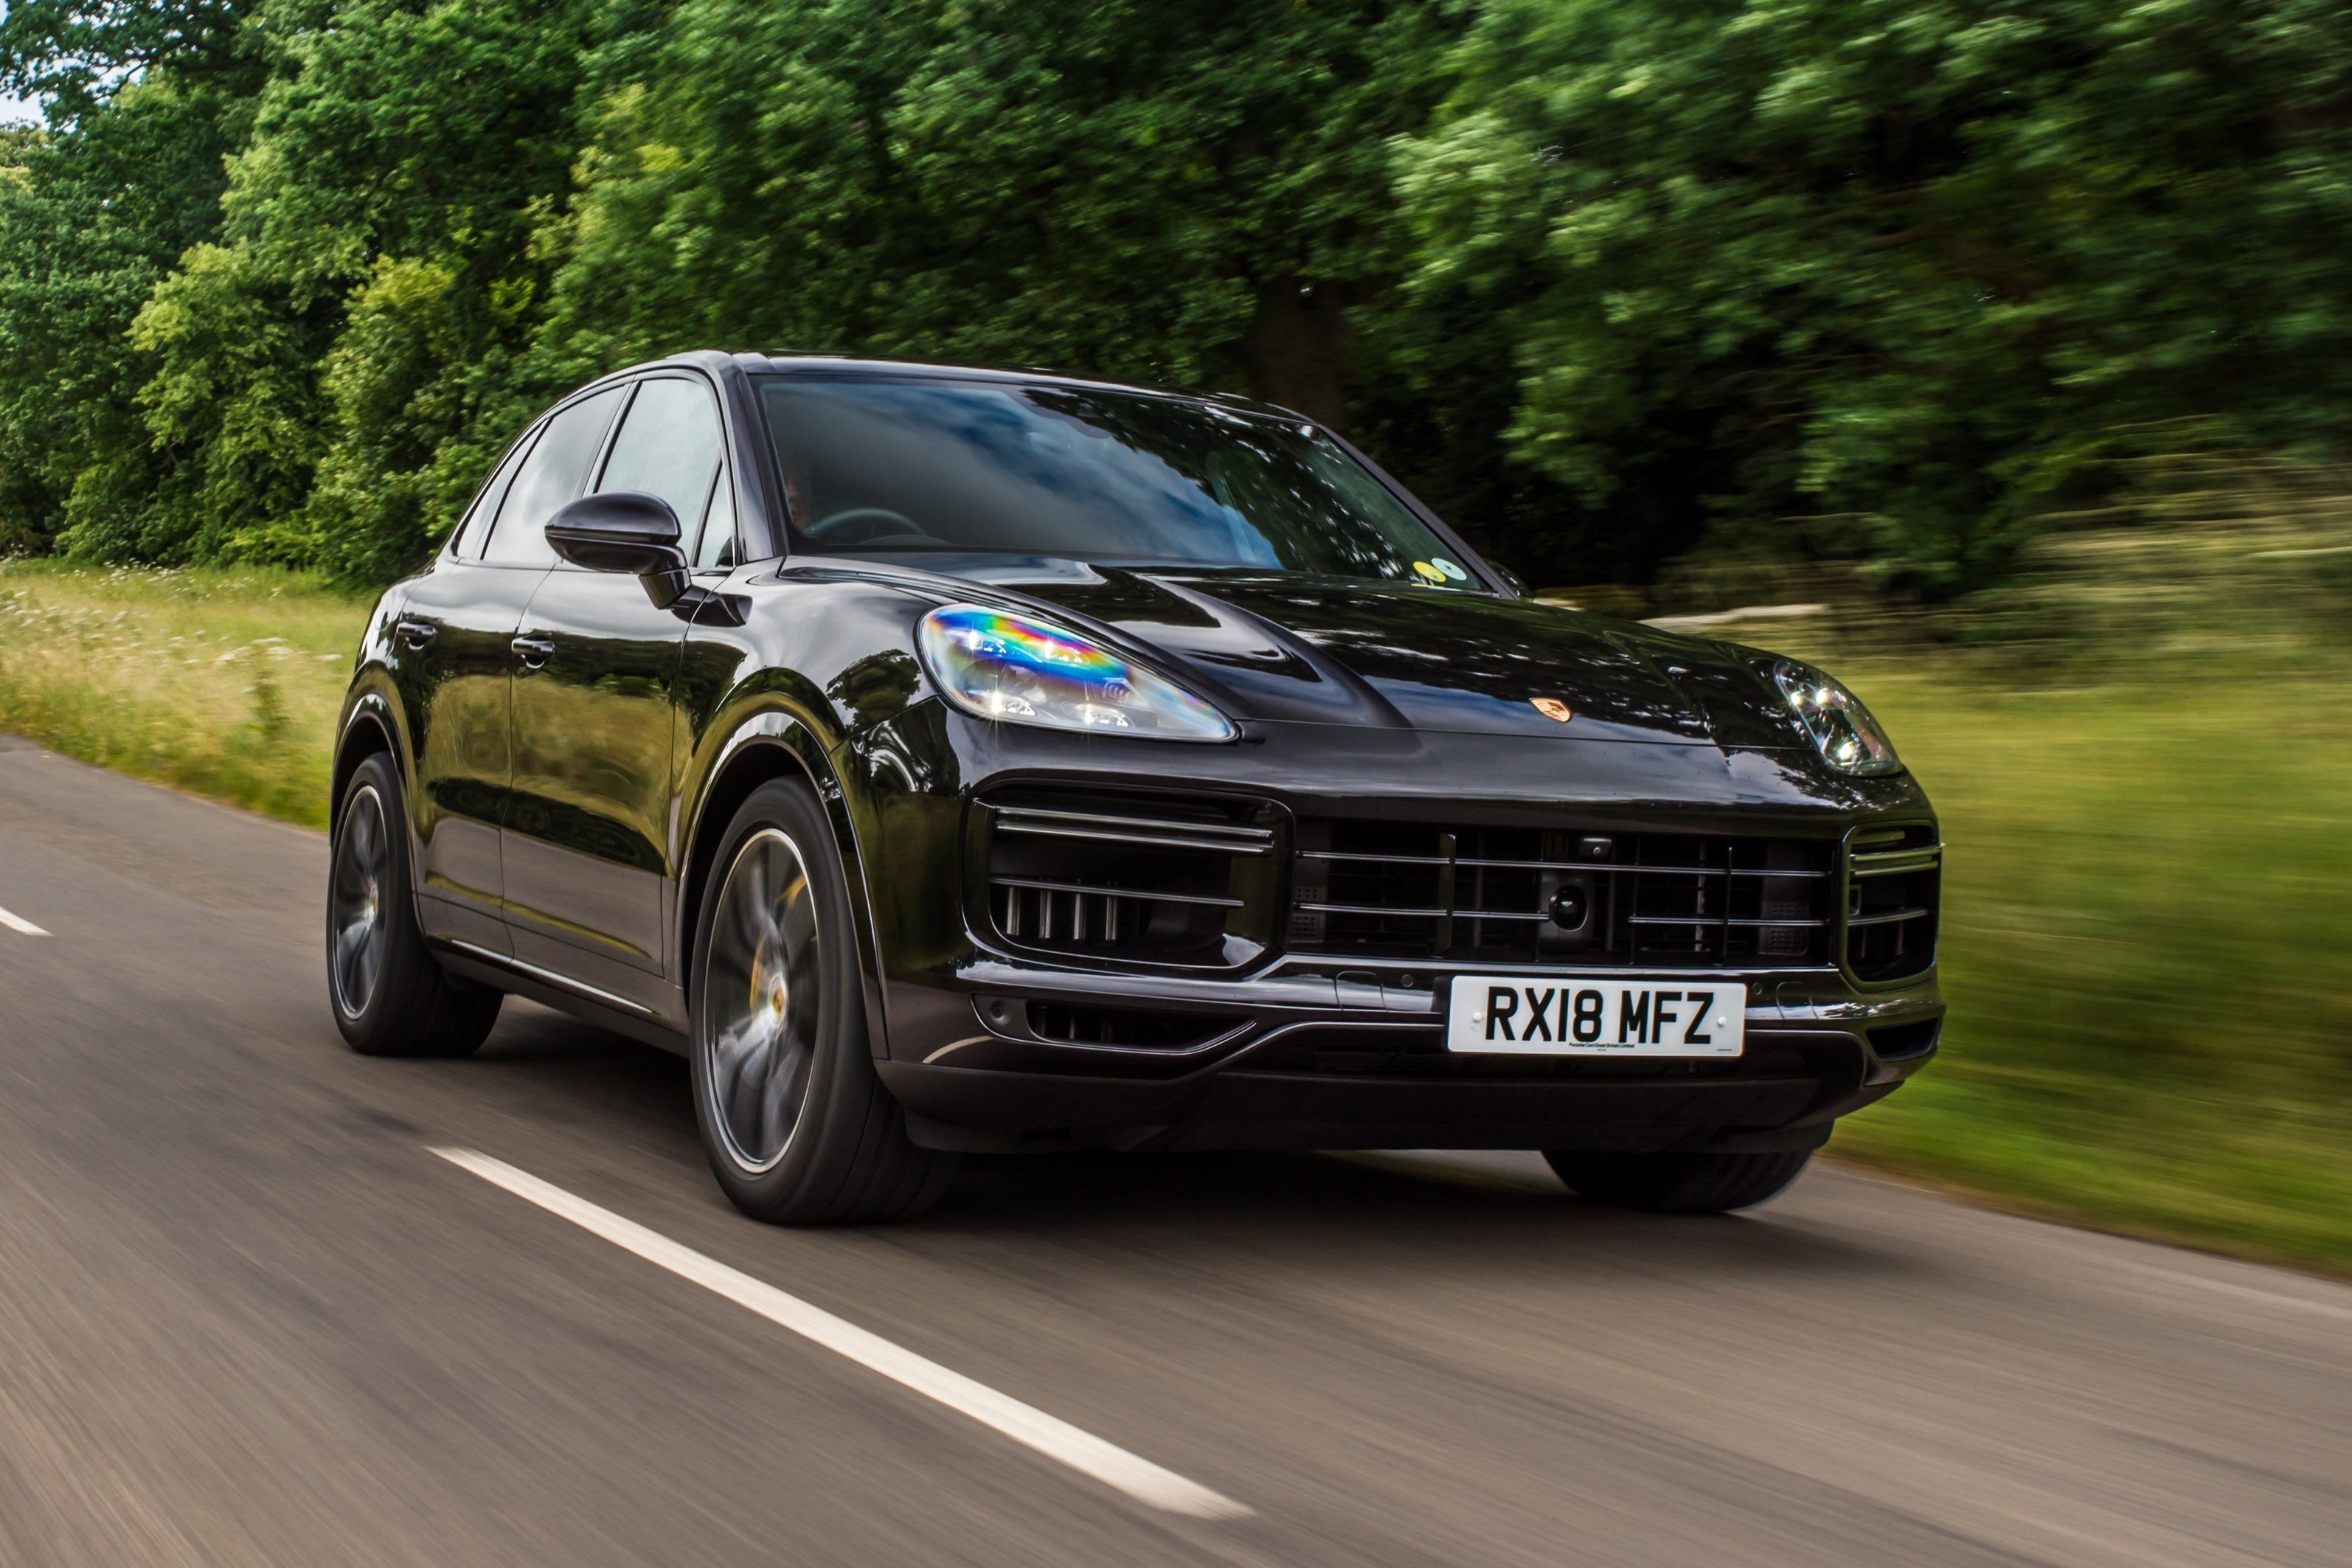 Porsche Cayenne Review 2023: exterior front three quarter photo of the Porsche Cayenne on the road